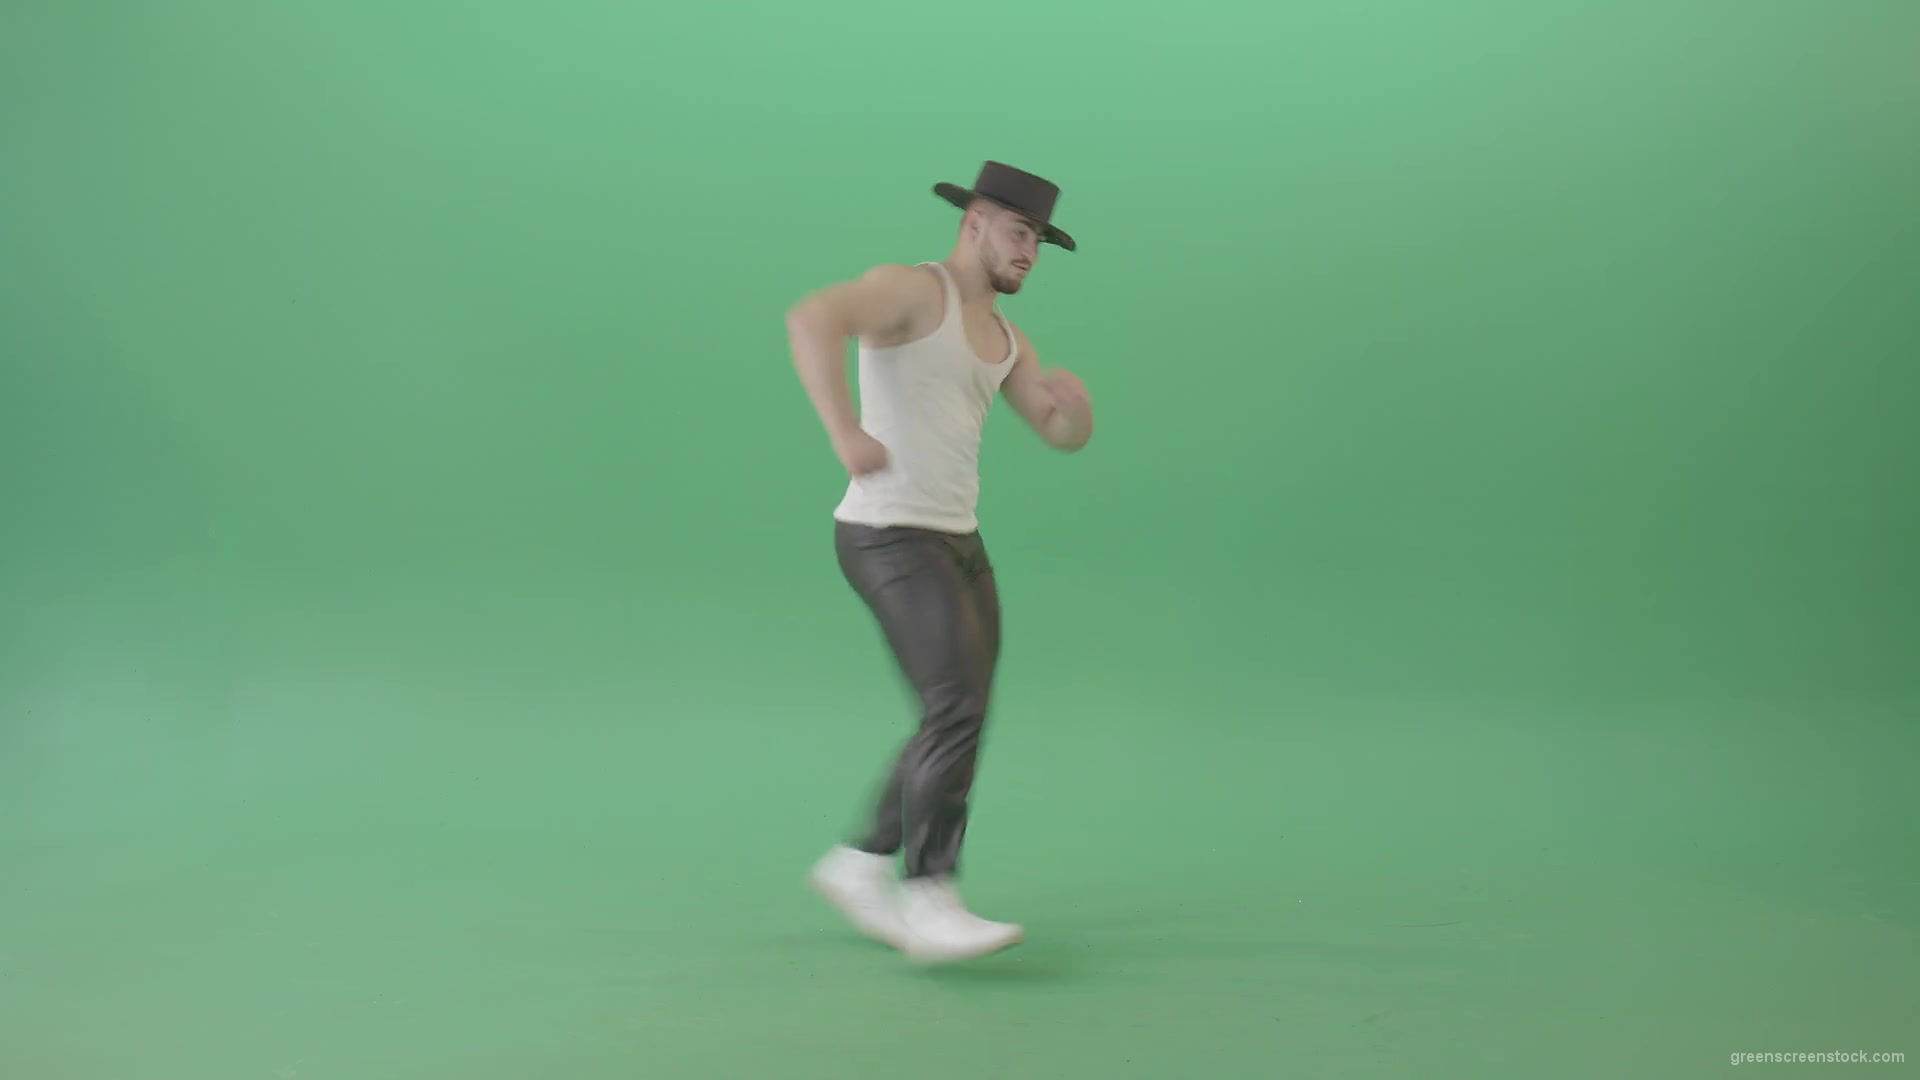 Adult-Man-makes-moonwalk-and-dancing-Pop-isolated-on-Green-Screen-4K-Video-Footage-1920_006 Green Screen Stock